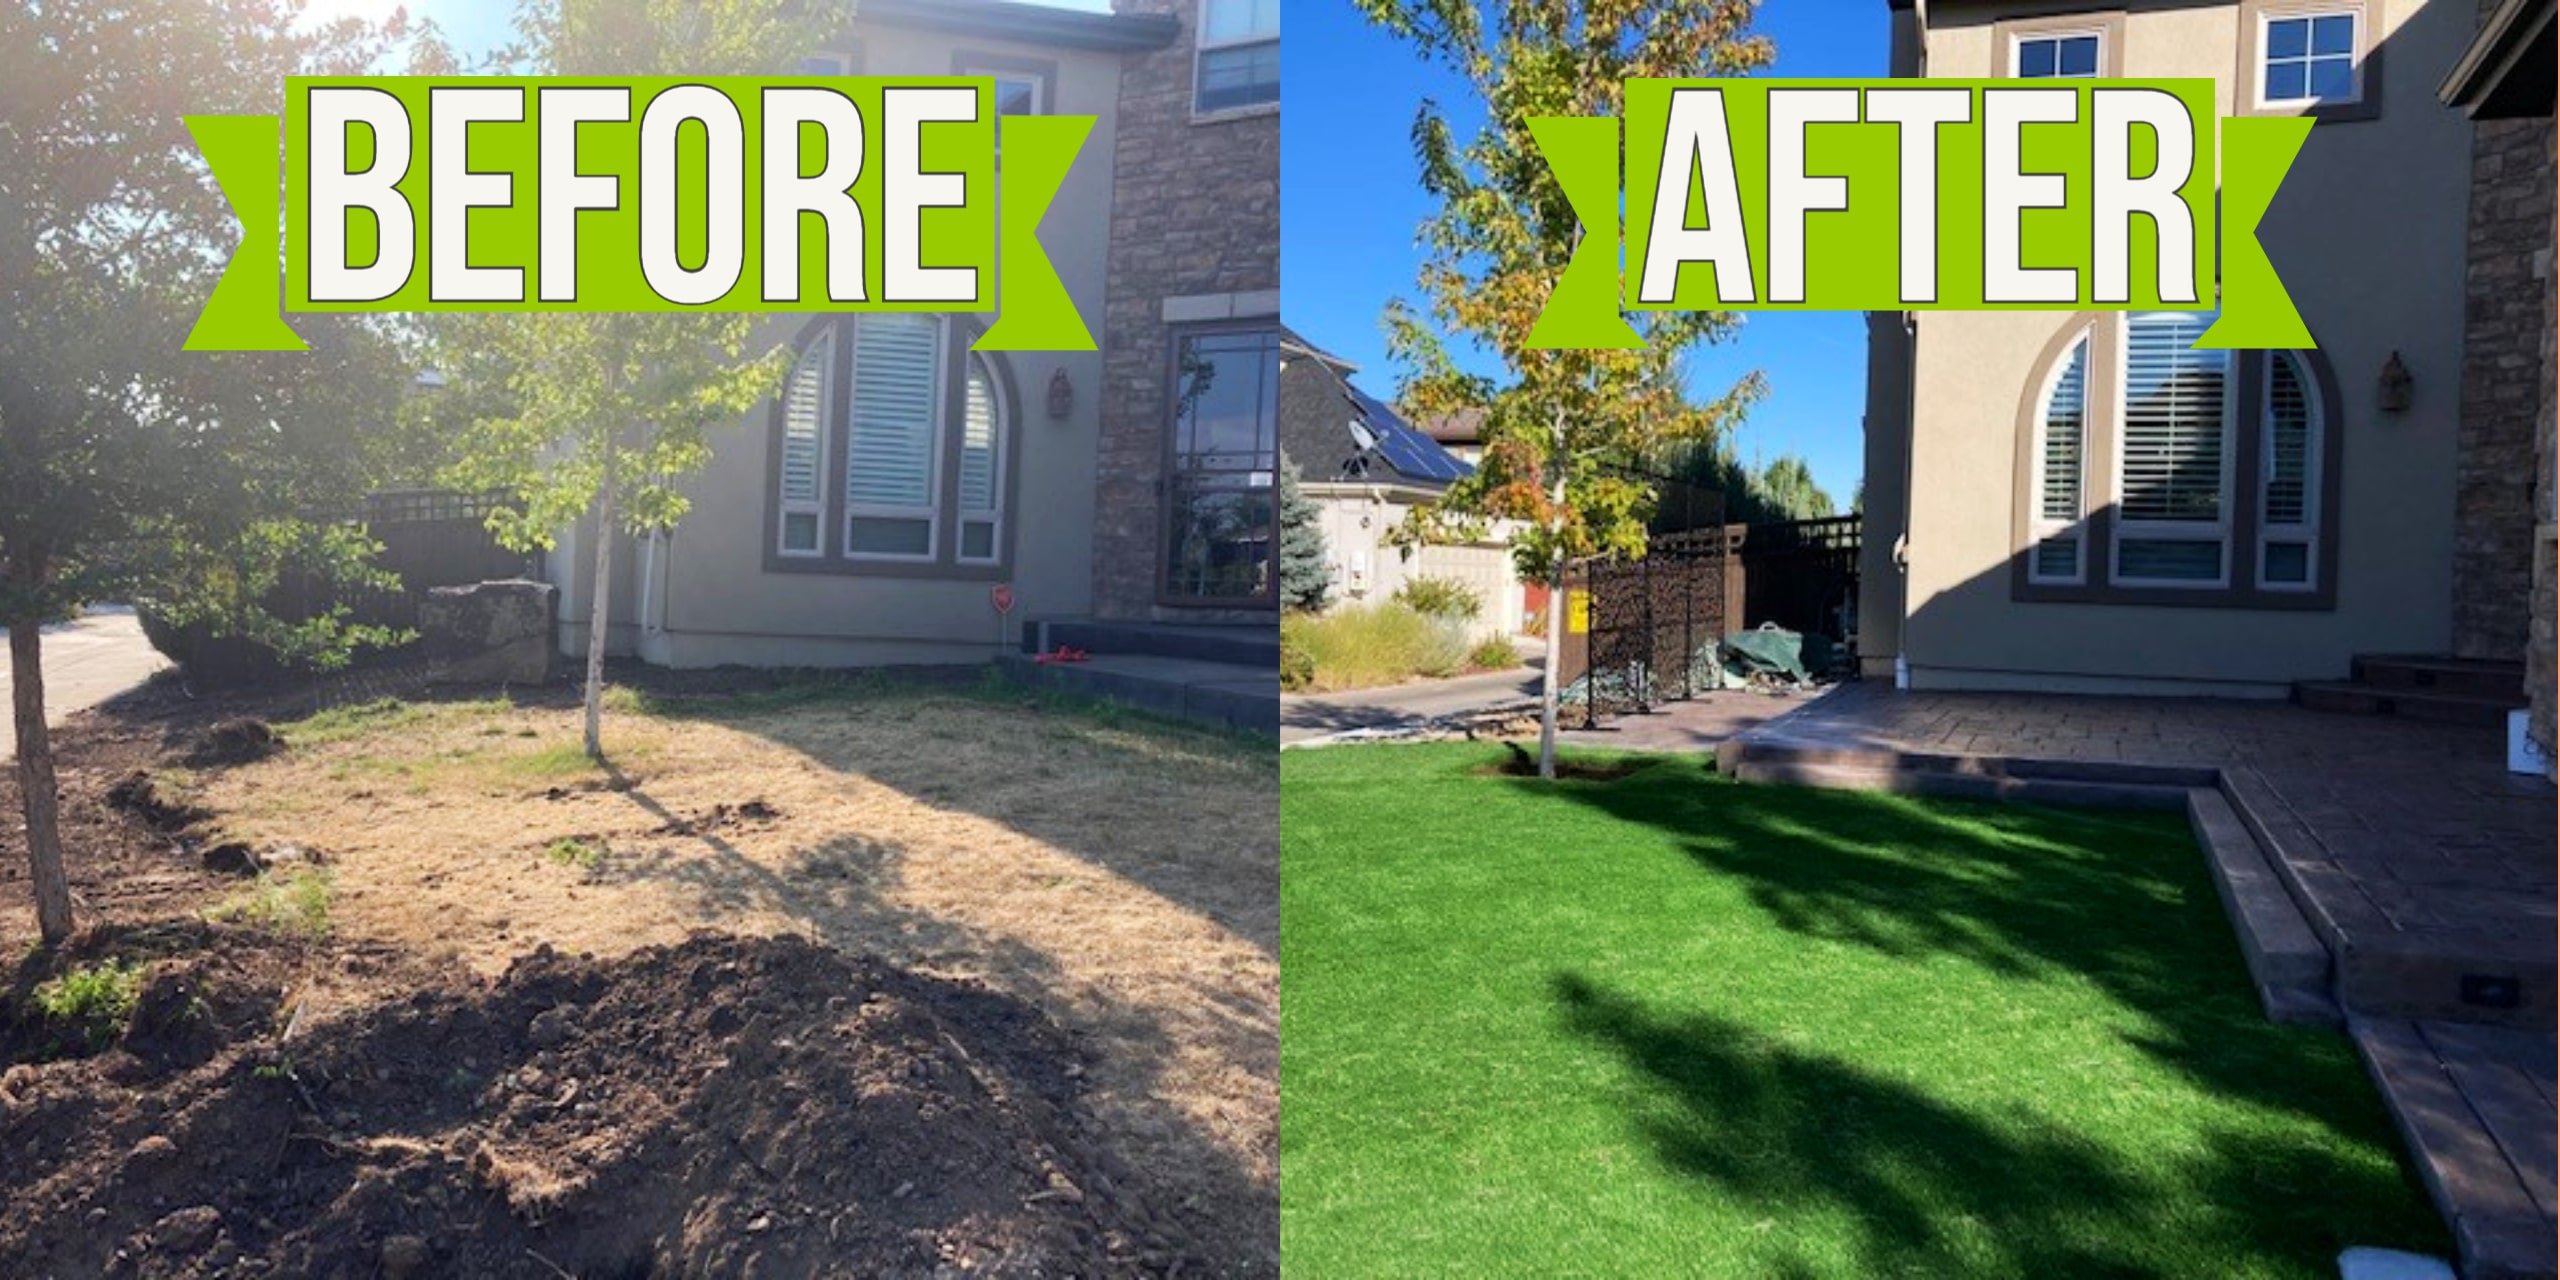 A Colorado Homeowner's 800 Square Foot Artificial Grass Installation Cost | Purchase Green Artificial Grass